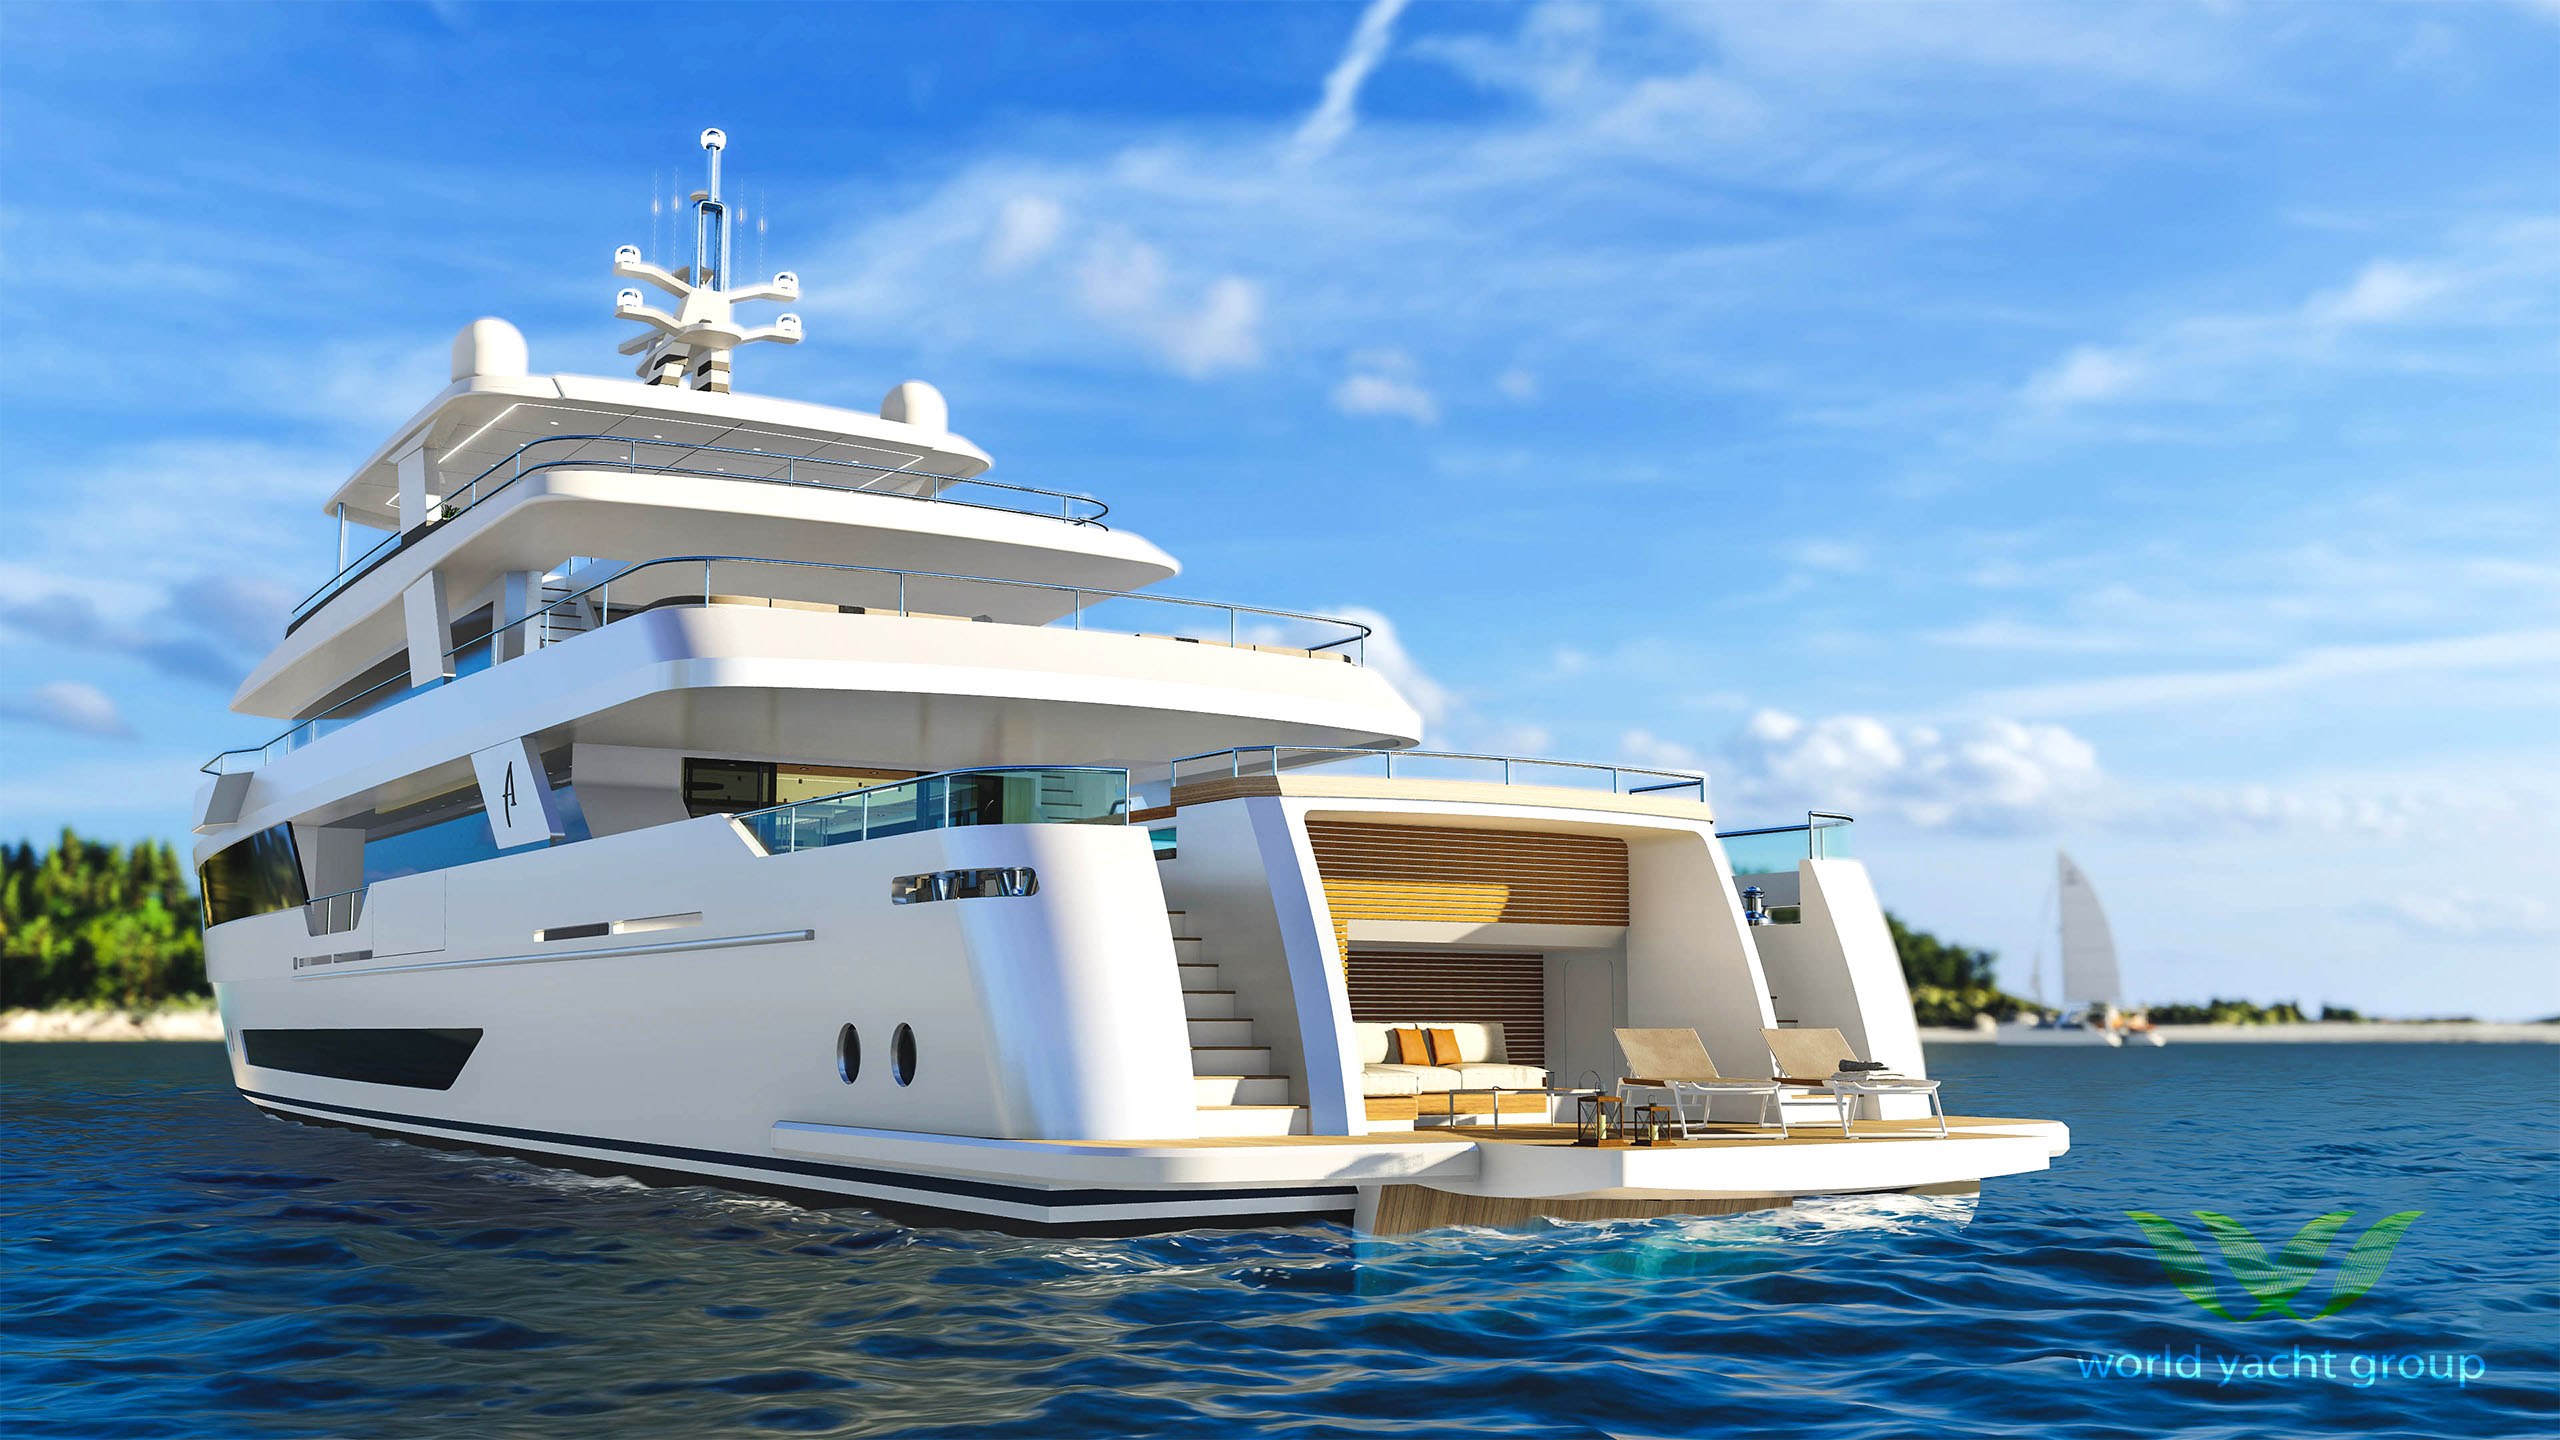 Project-Artemis-World-Yacht-Group-Yacht-For-Sale